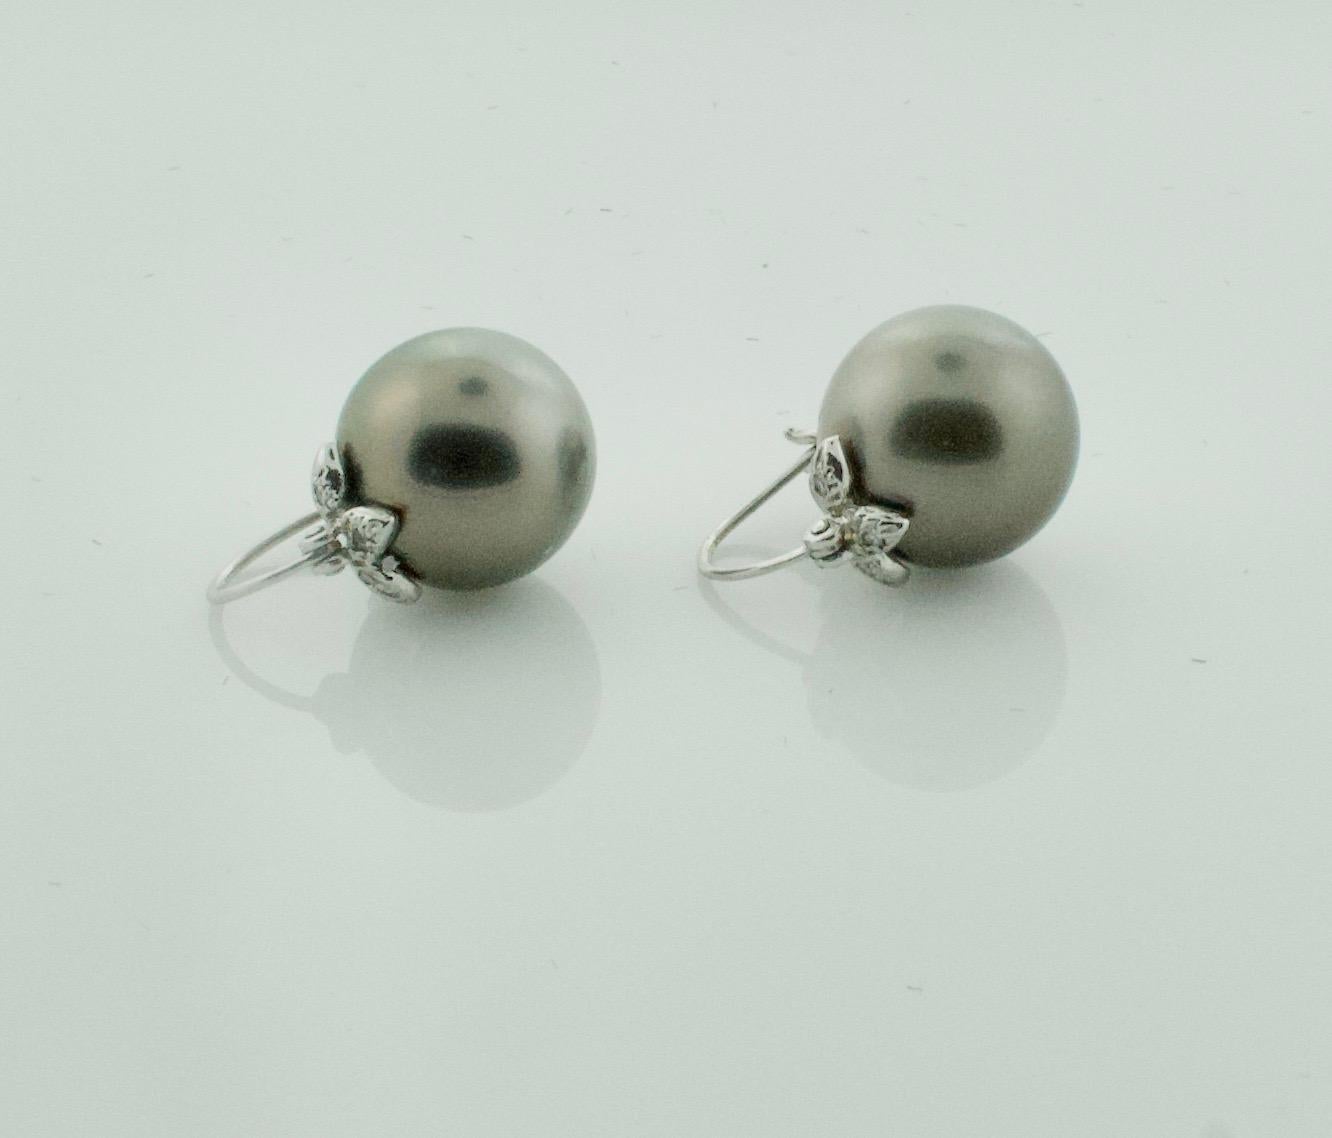 Tahitian Pearl and Diamond Earrings 13.5 mm in 18k White Gold
Six Round Brilliant Cut Diamonds Weighing .05 Carats Approximately 